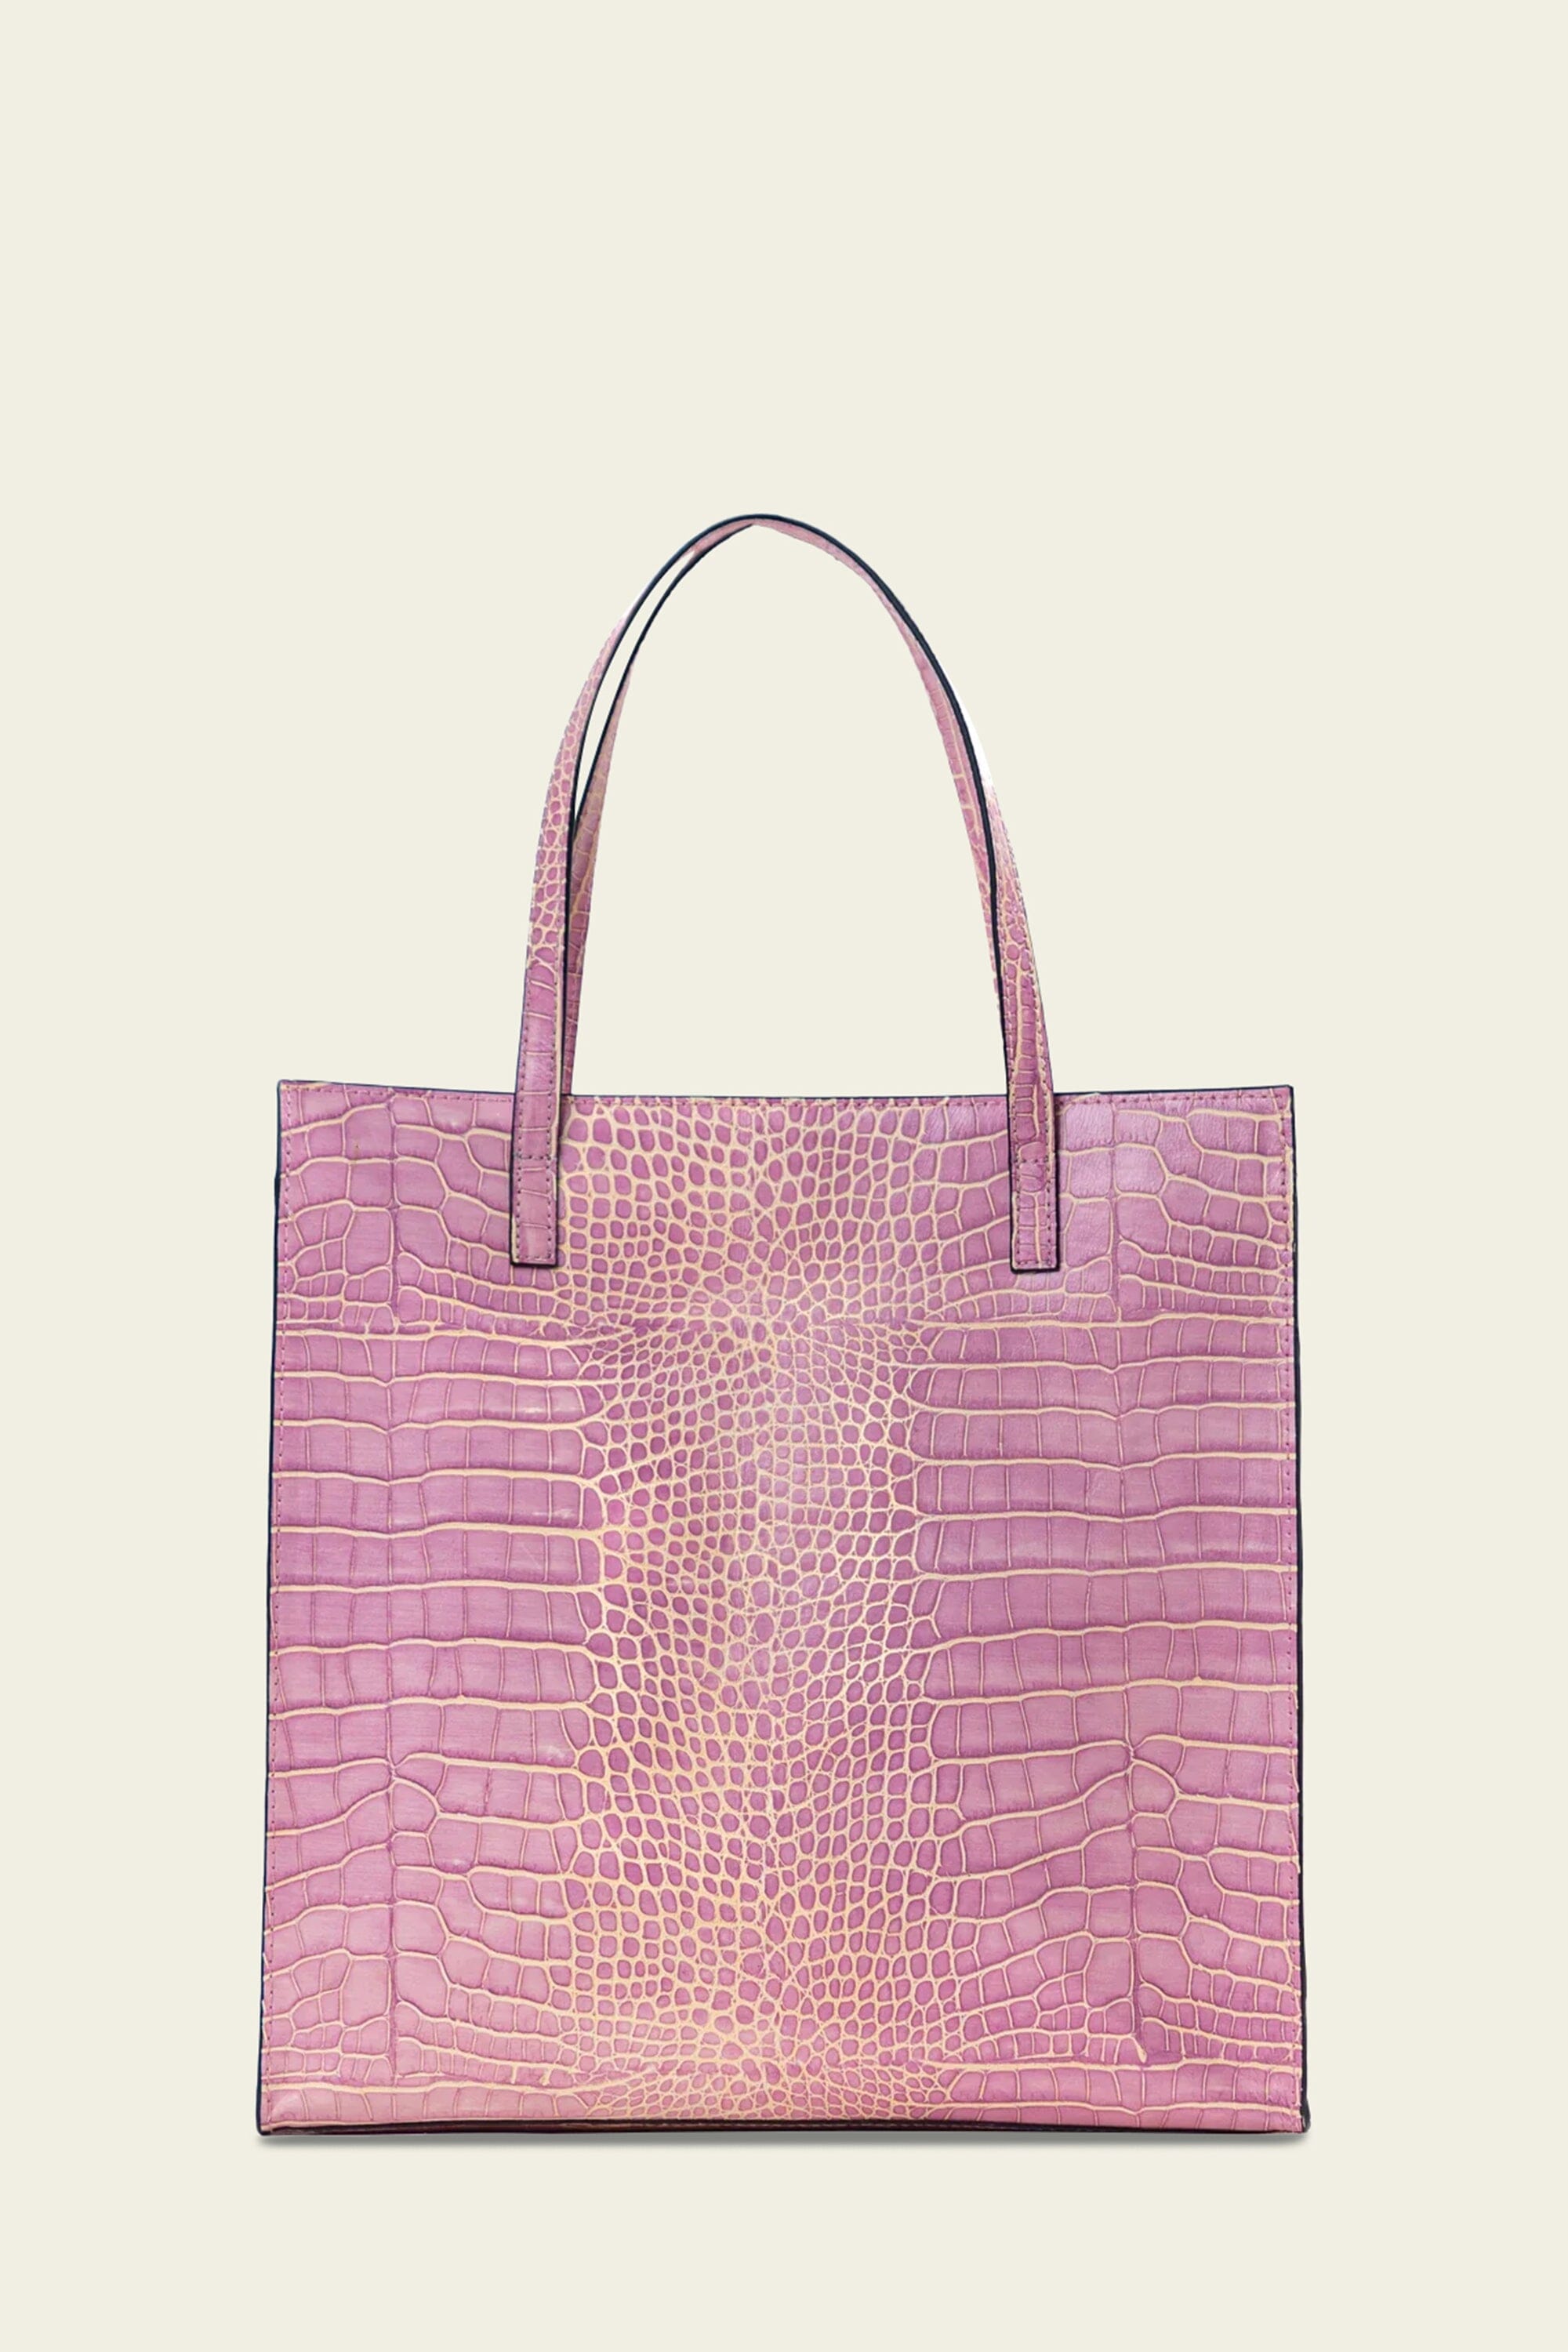 Eli tote in candy pink